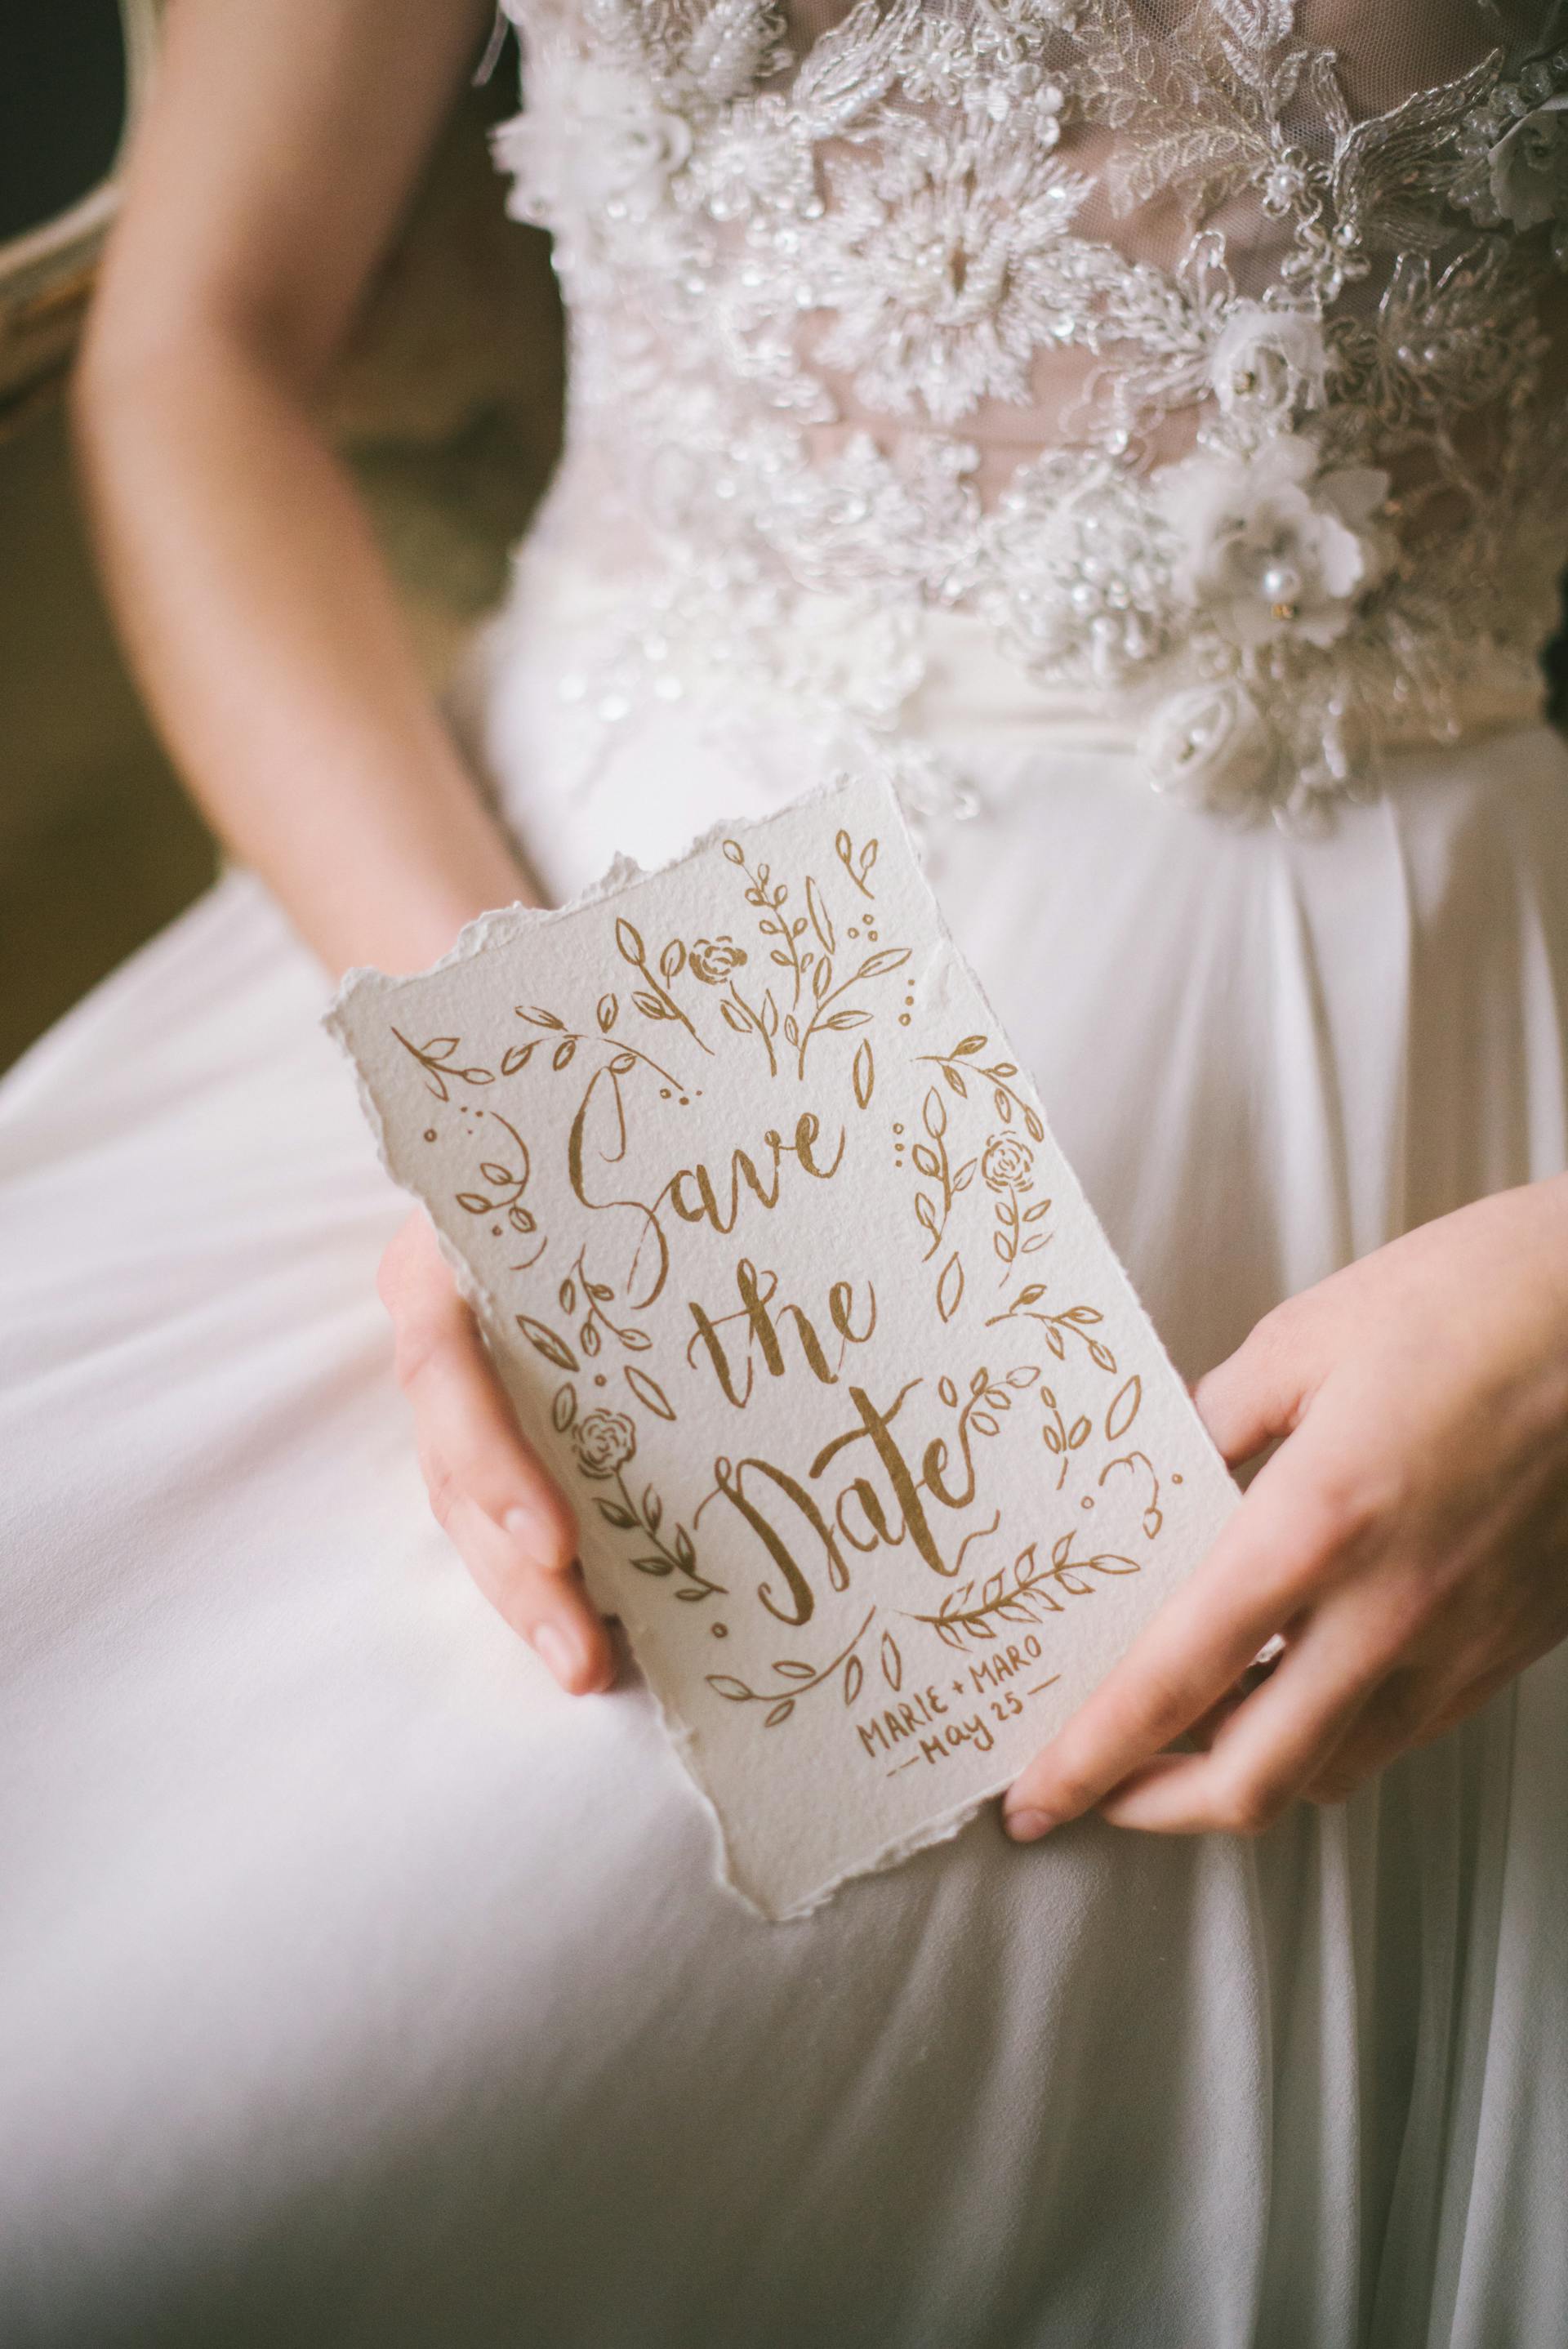 A bride holding a card | Source: Pexels